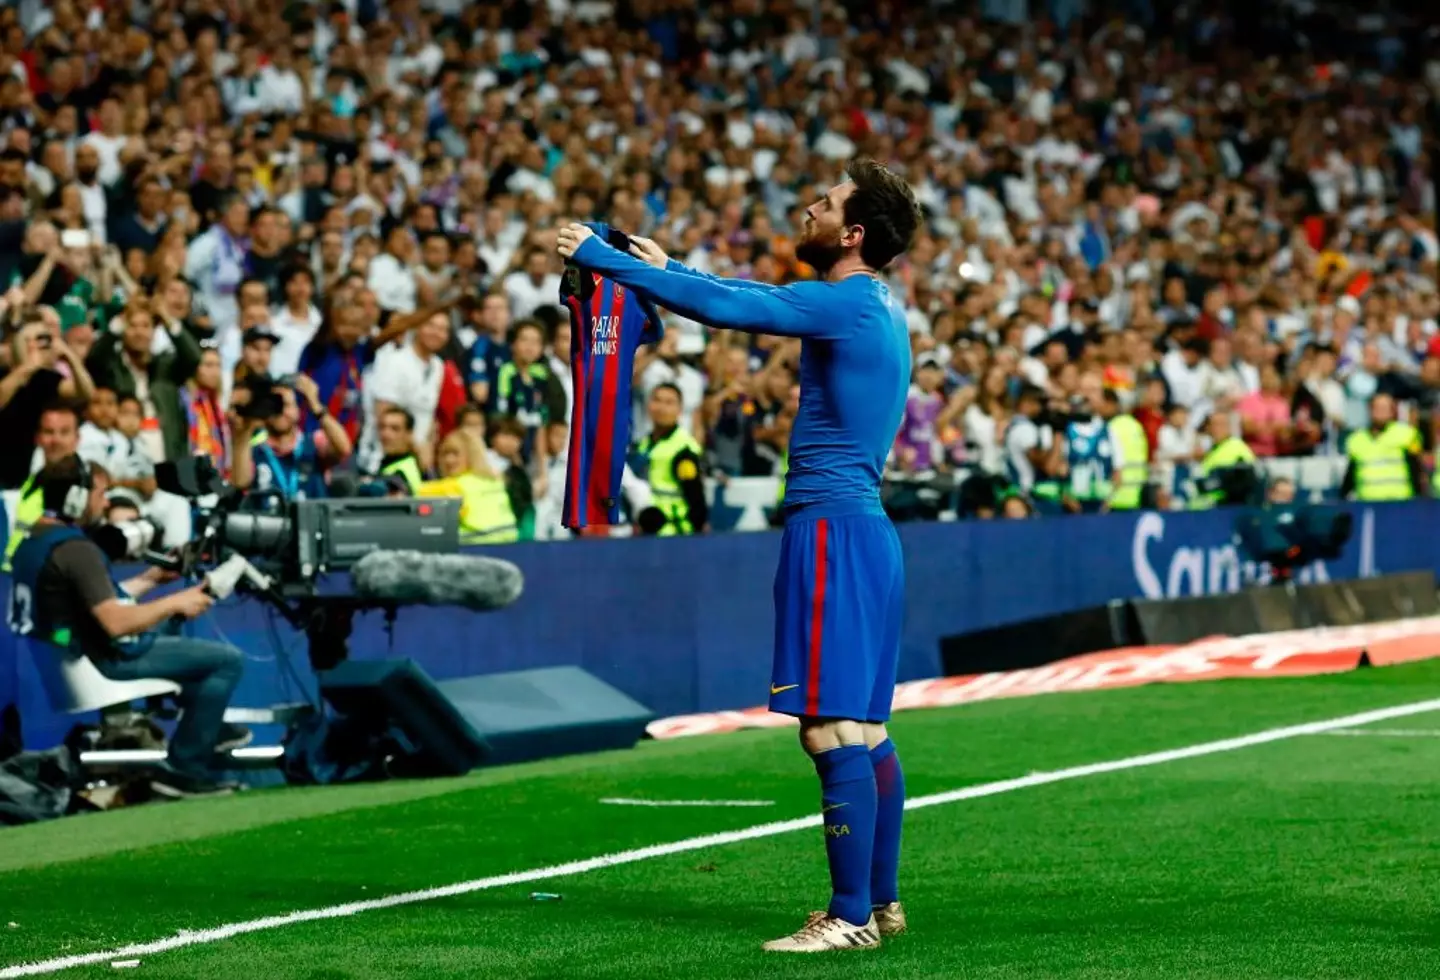 Lionel Messi's iconic celebration in front of Real Madrid fans (